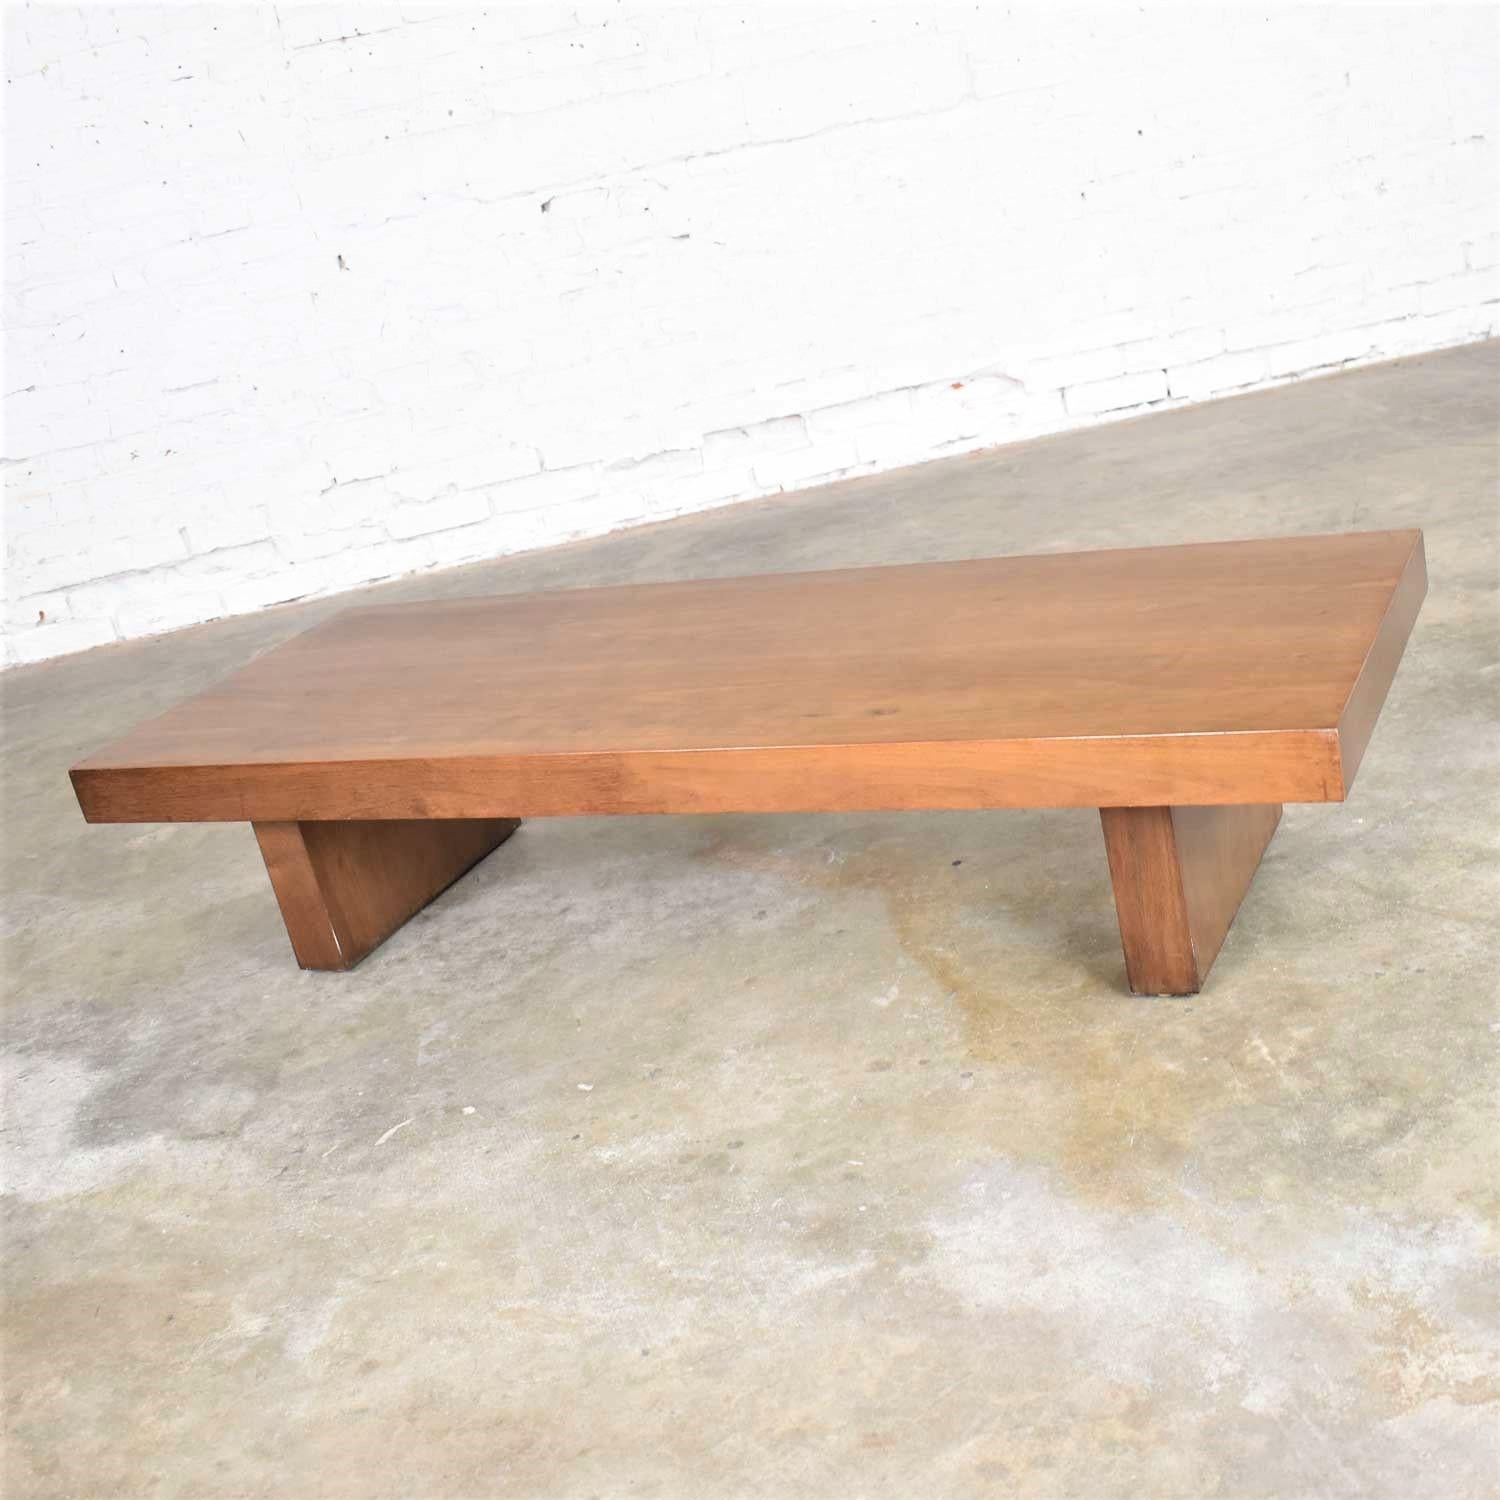 20th Century Show-Pieces Mid-Century Modern Asian Low Coffee Teahouse Table Bench in Walnut